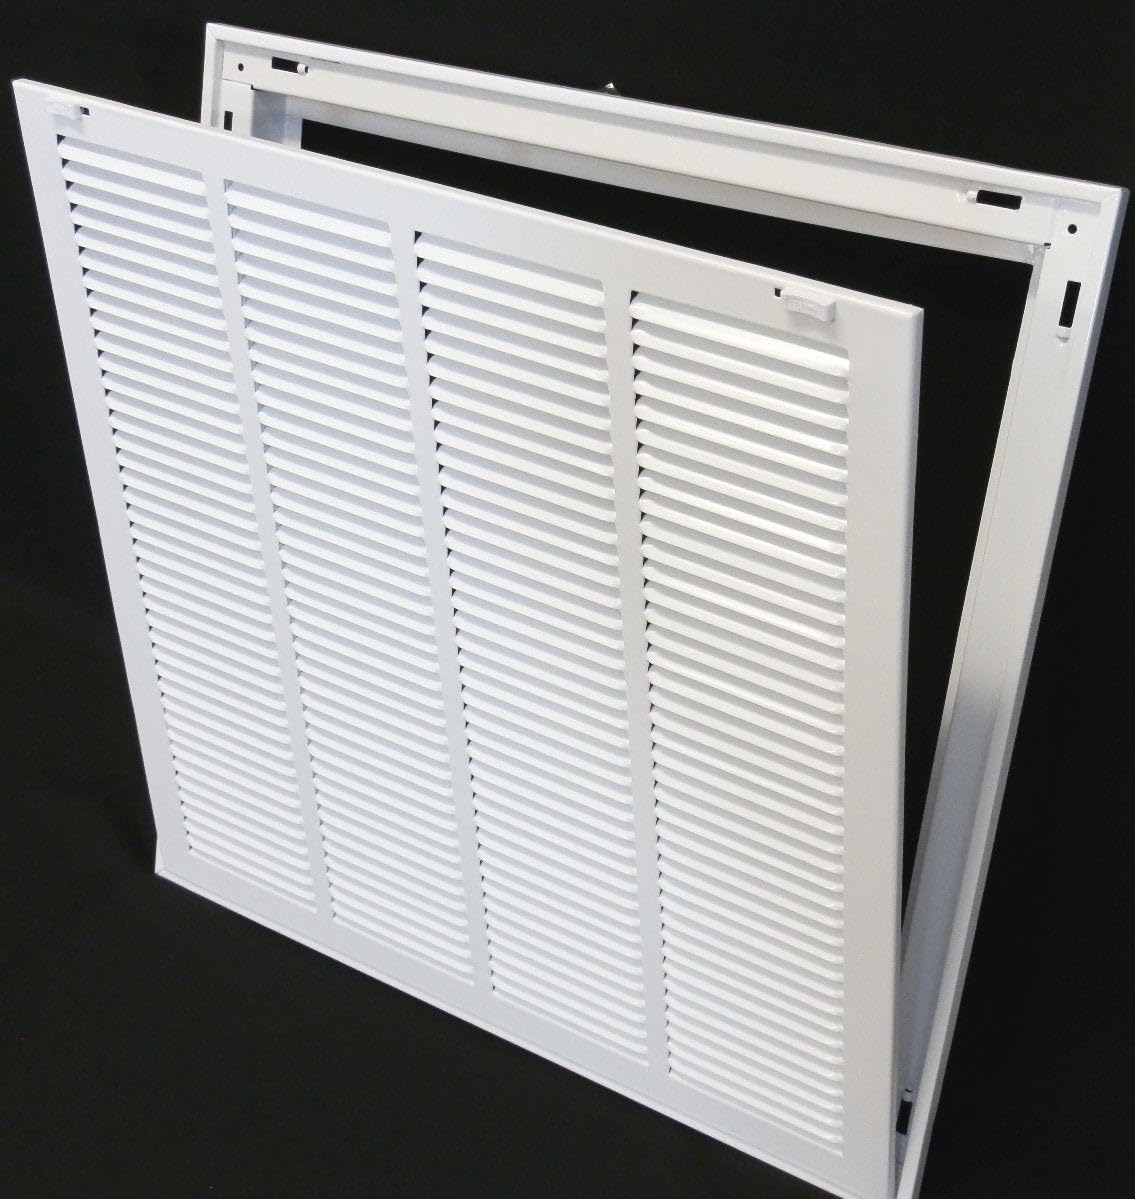 20&quot; X 30&quot; Steel Return Air Filter Grille for 1&quot; Filter - Removable Frame - * Filter Included *[Outer Dimensions: 22 5/8&quot; X 32 5/8&quot;]